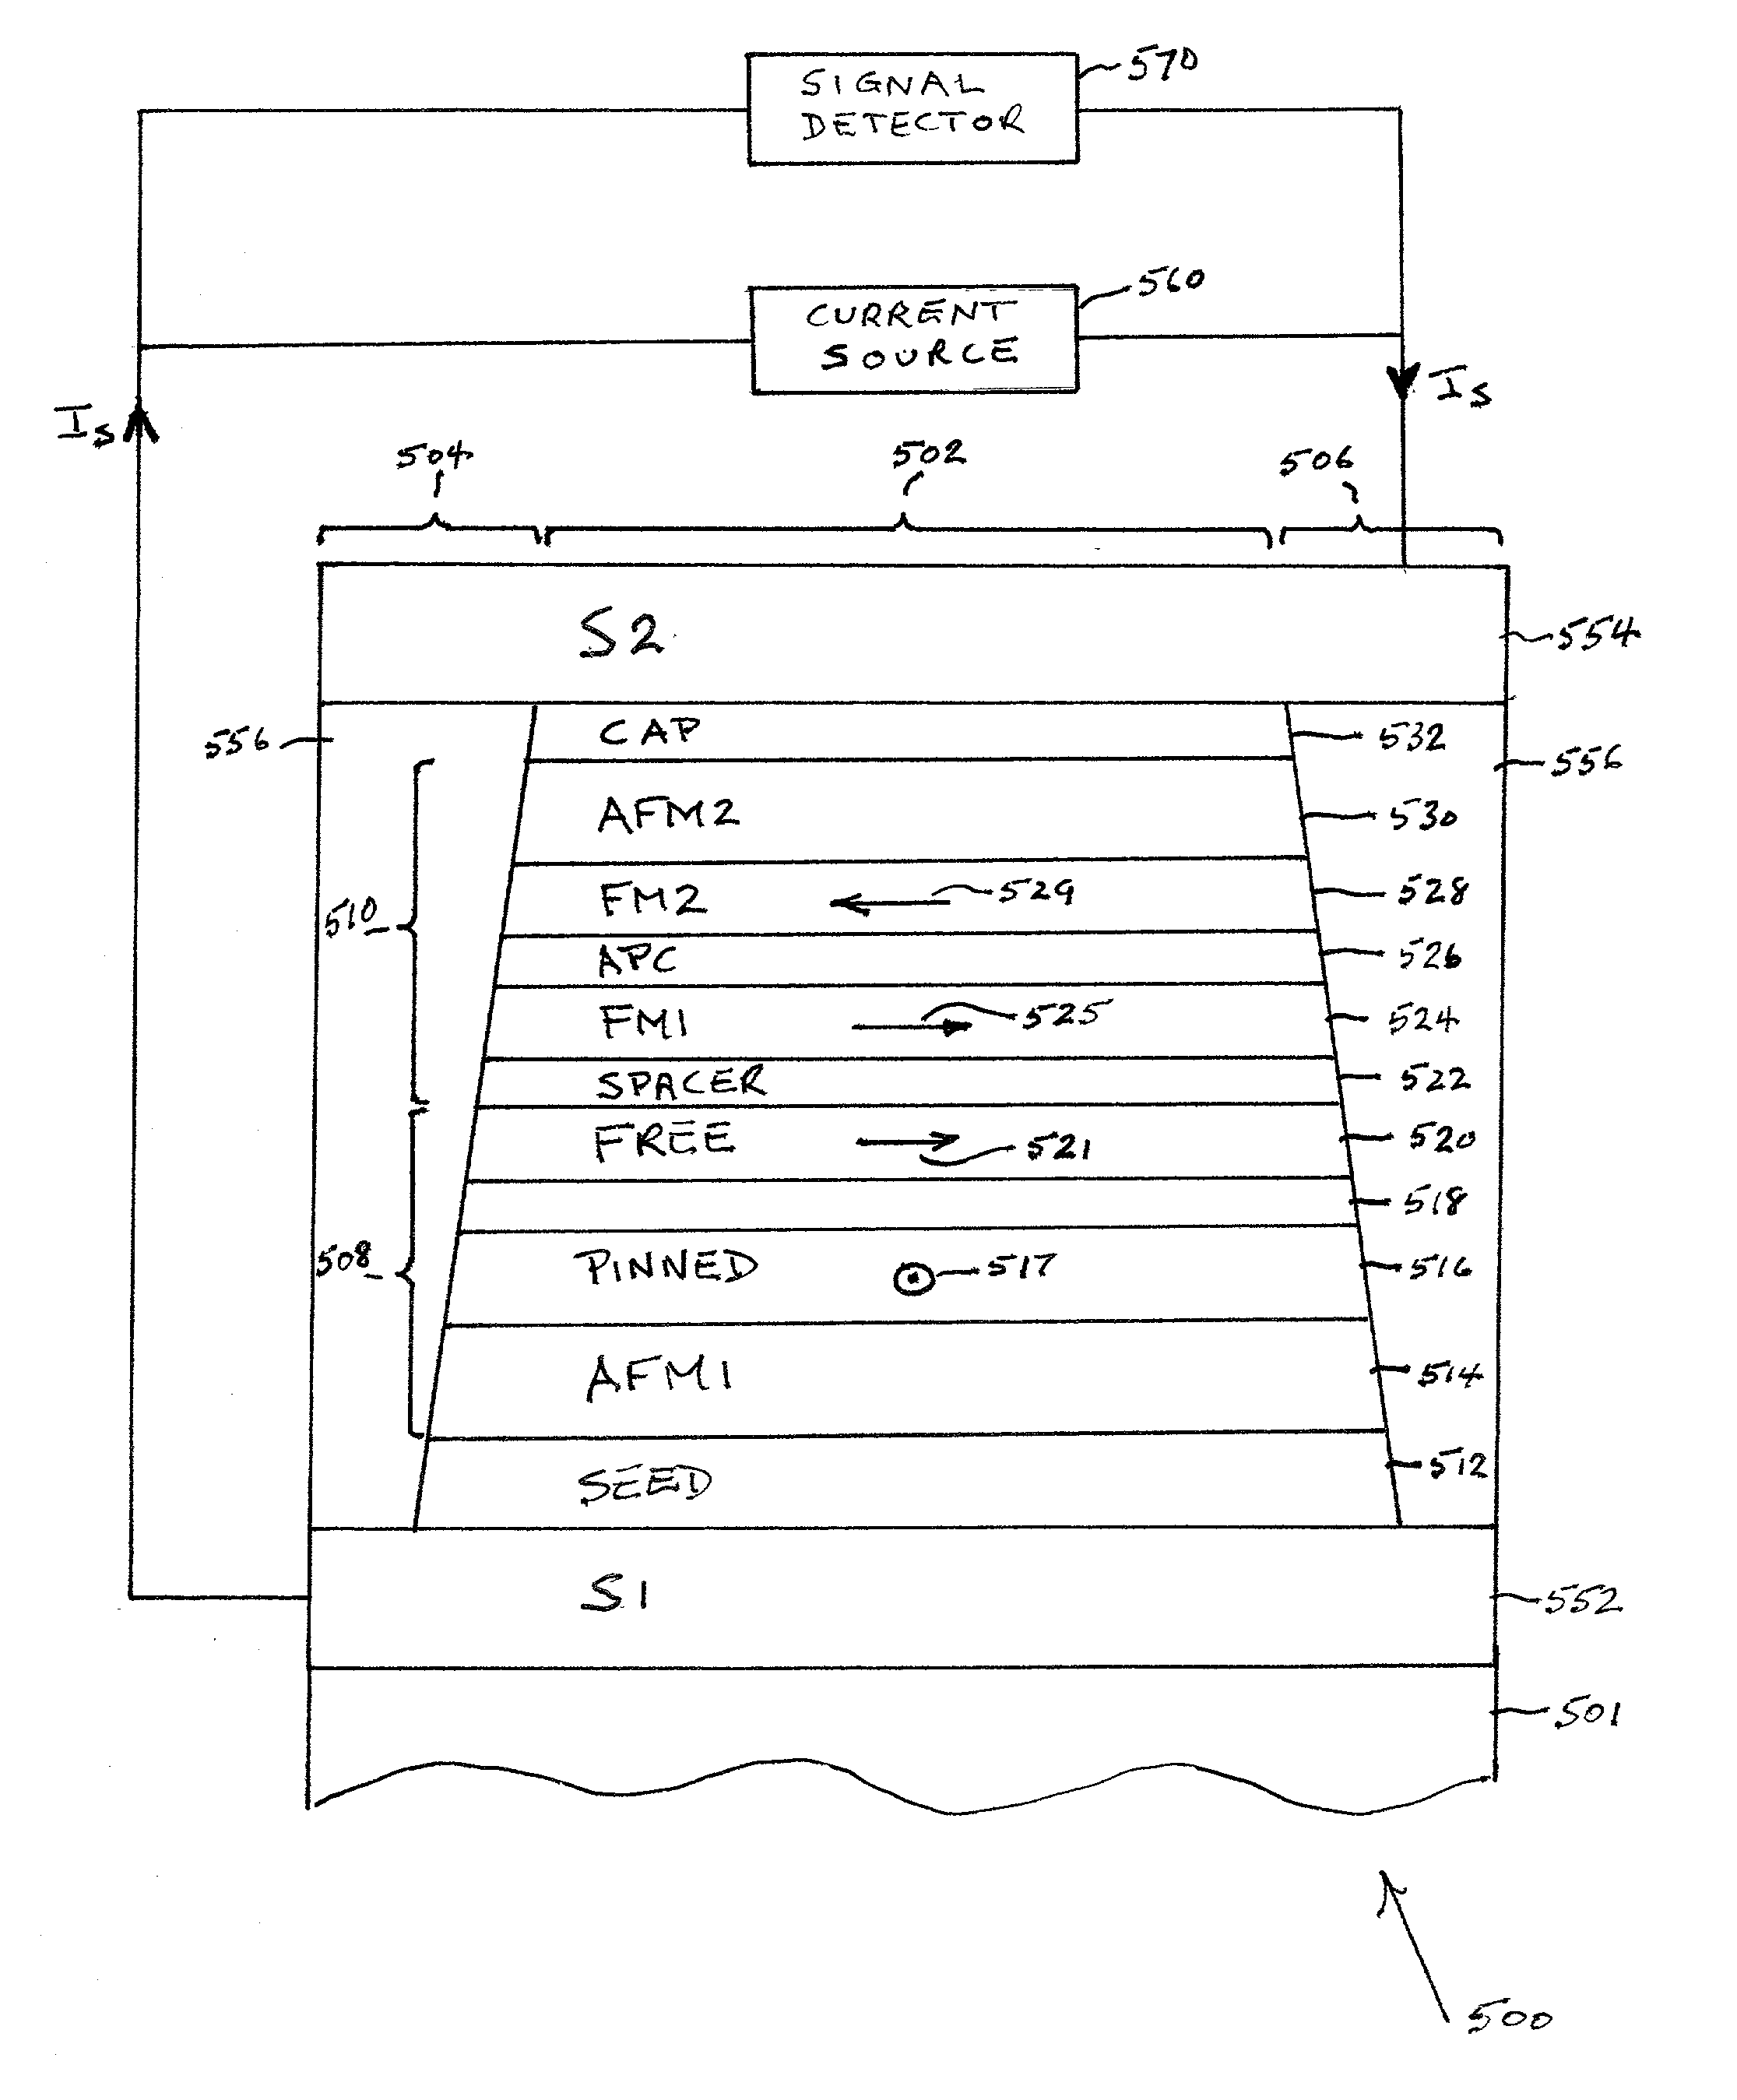 Stabilization structures for CPP sensor